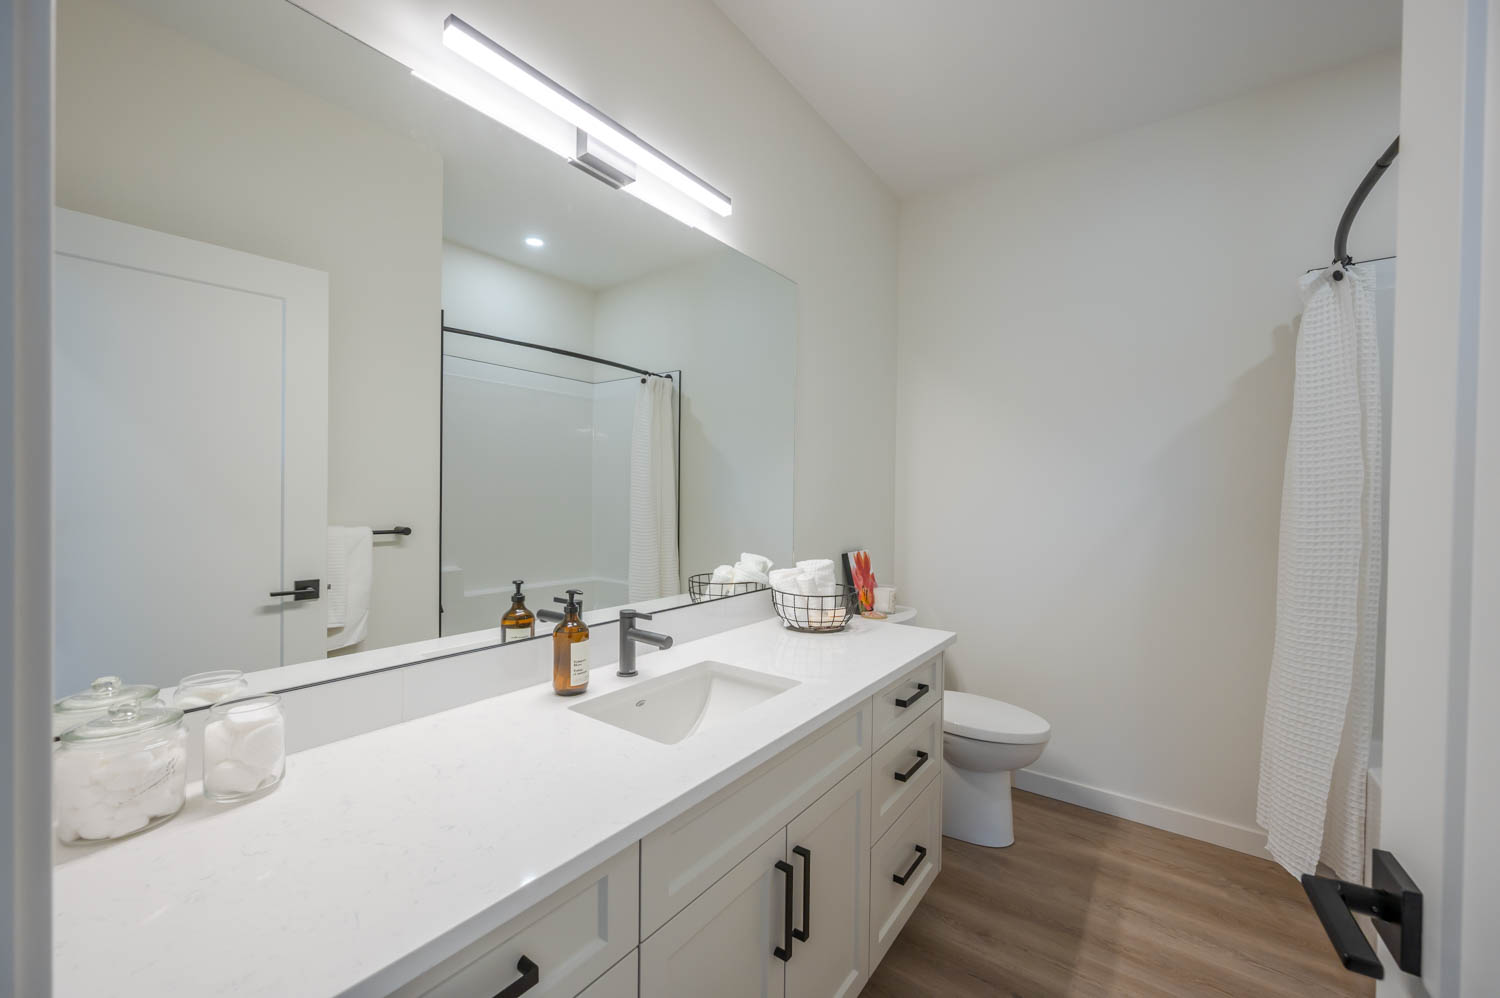 Bathroom interior with sink, toilet, and mirror